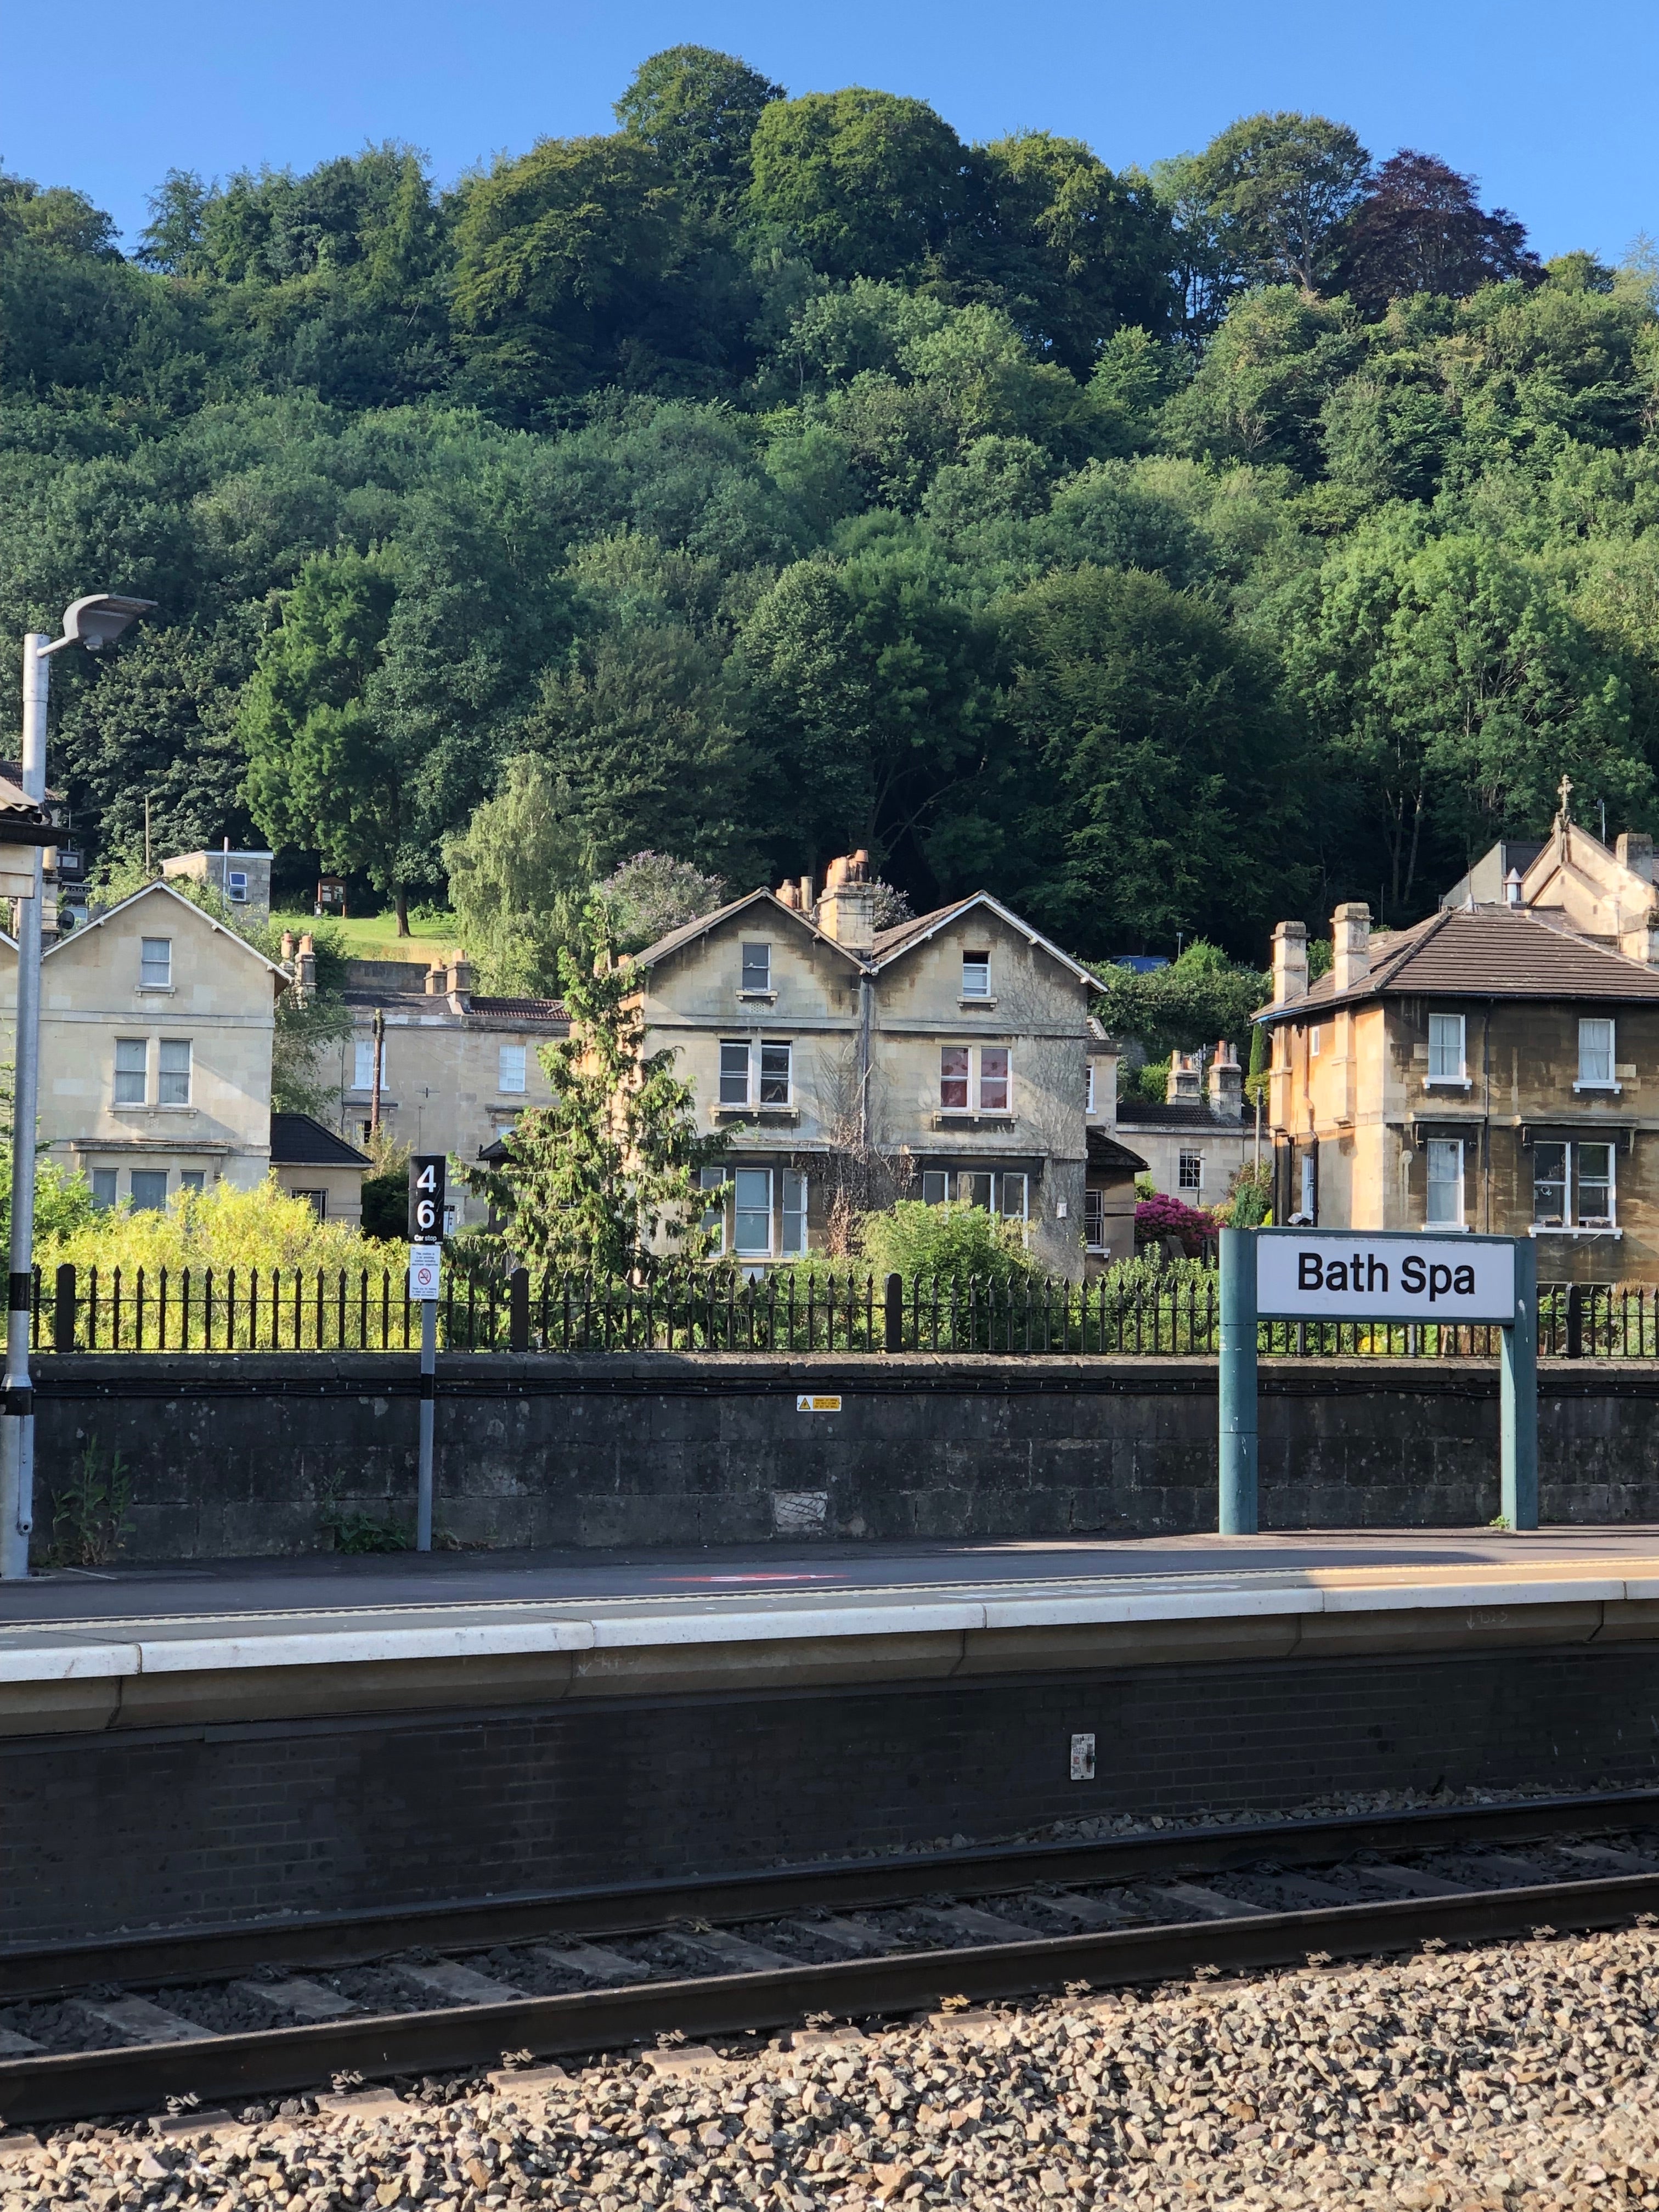  A view of the train platform at Bath Spa with houses and a hillside in the background.